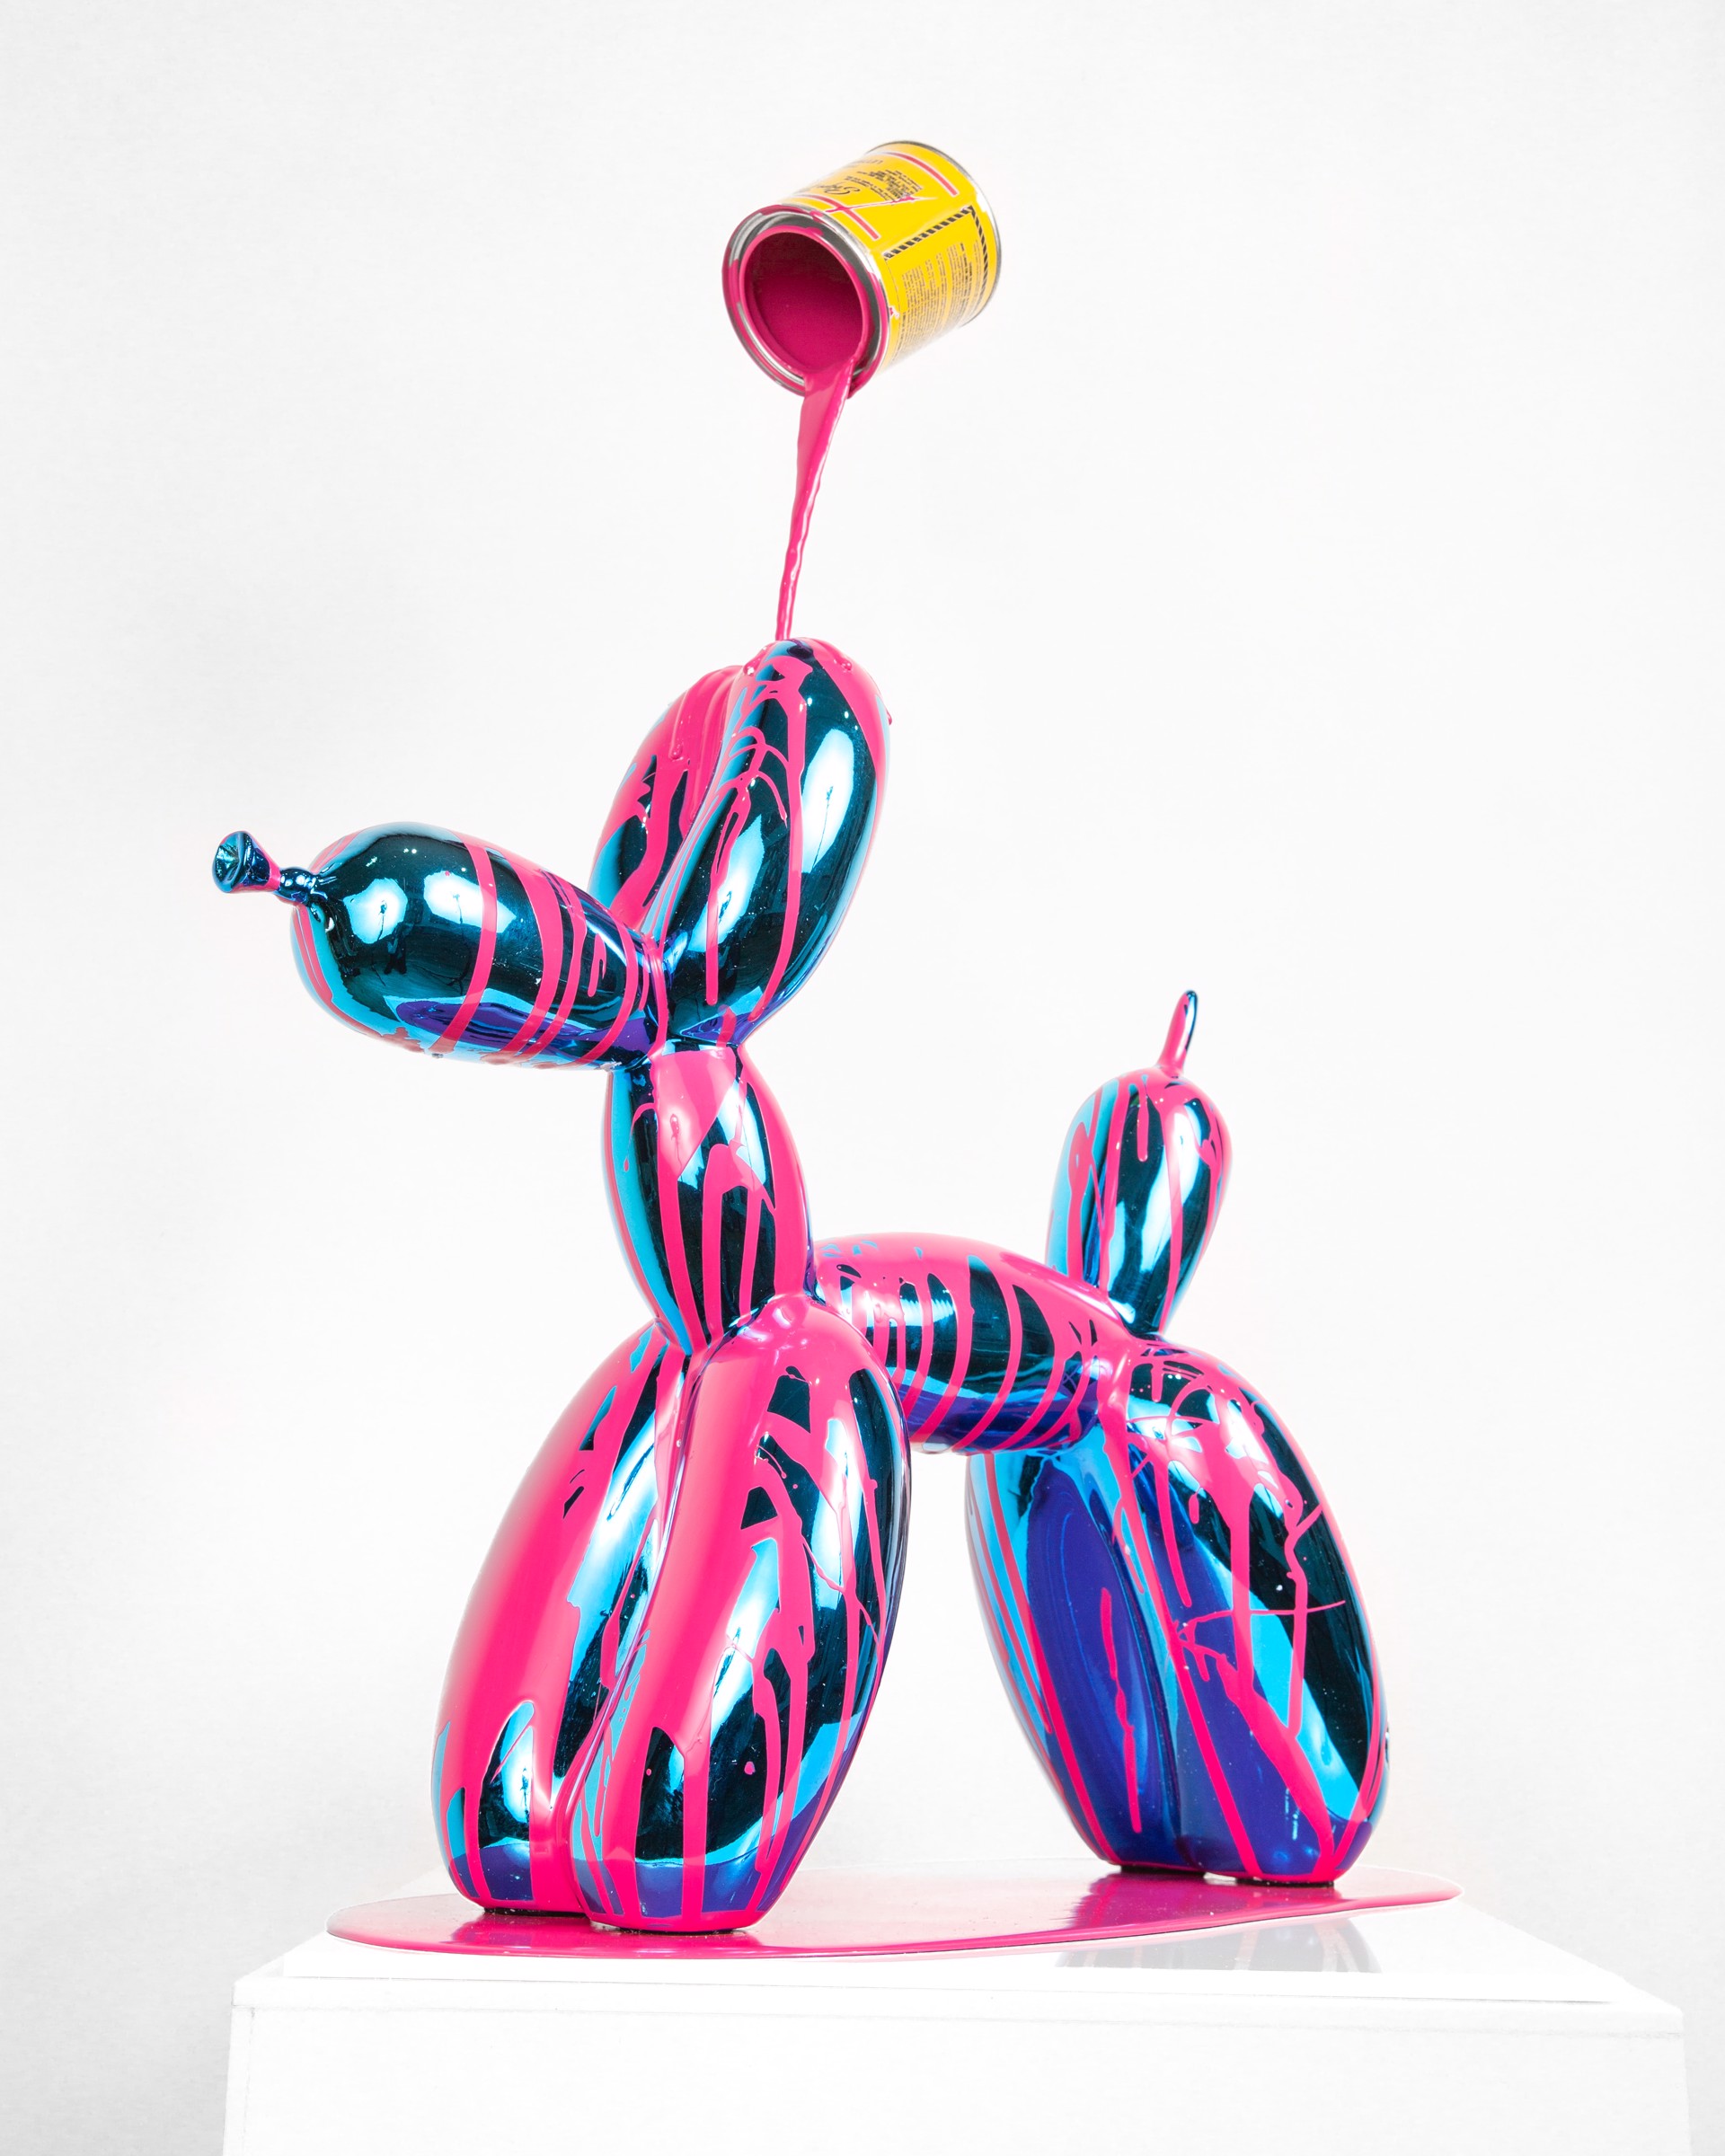 Happy accident series - Big Balloon dog (blue and pink) - commission by Joe Suzuki